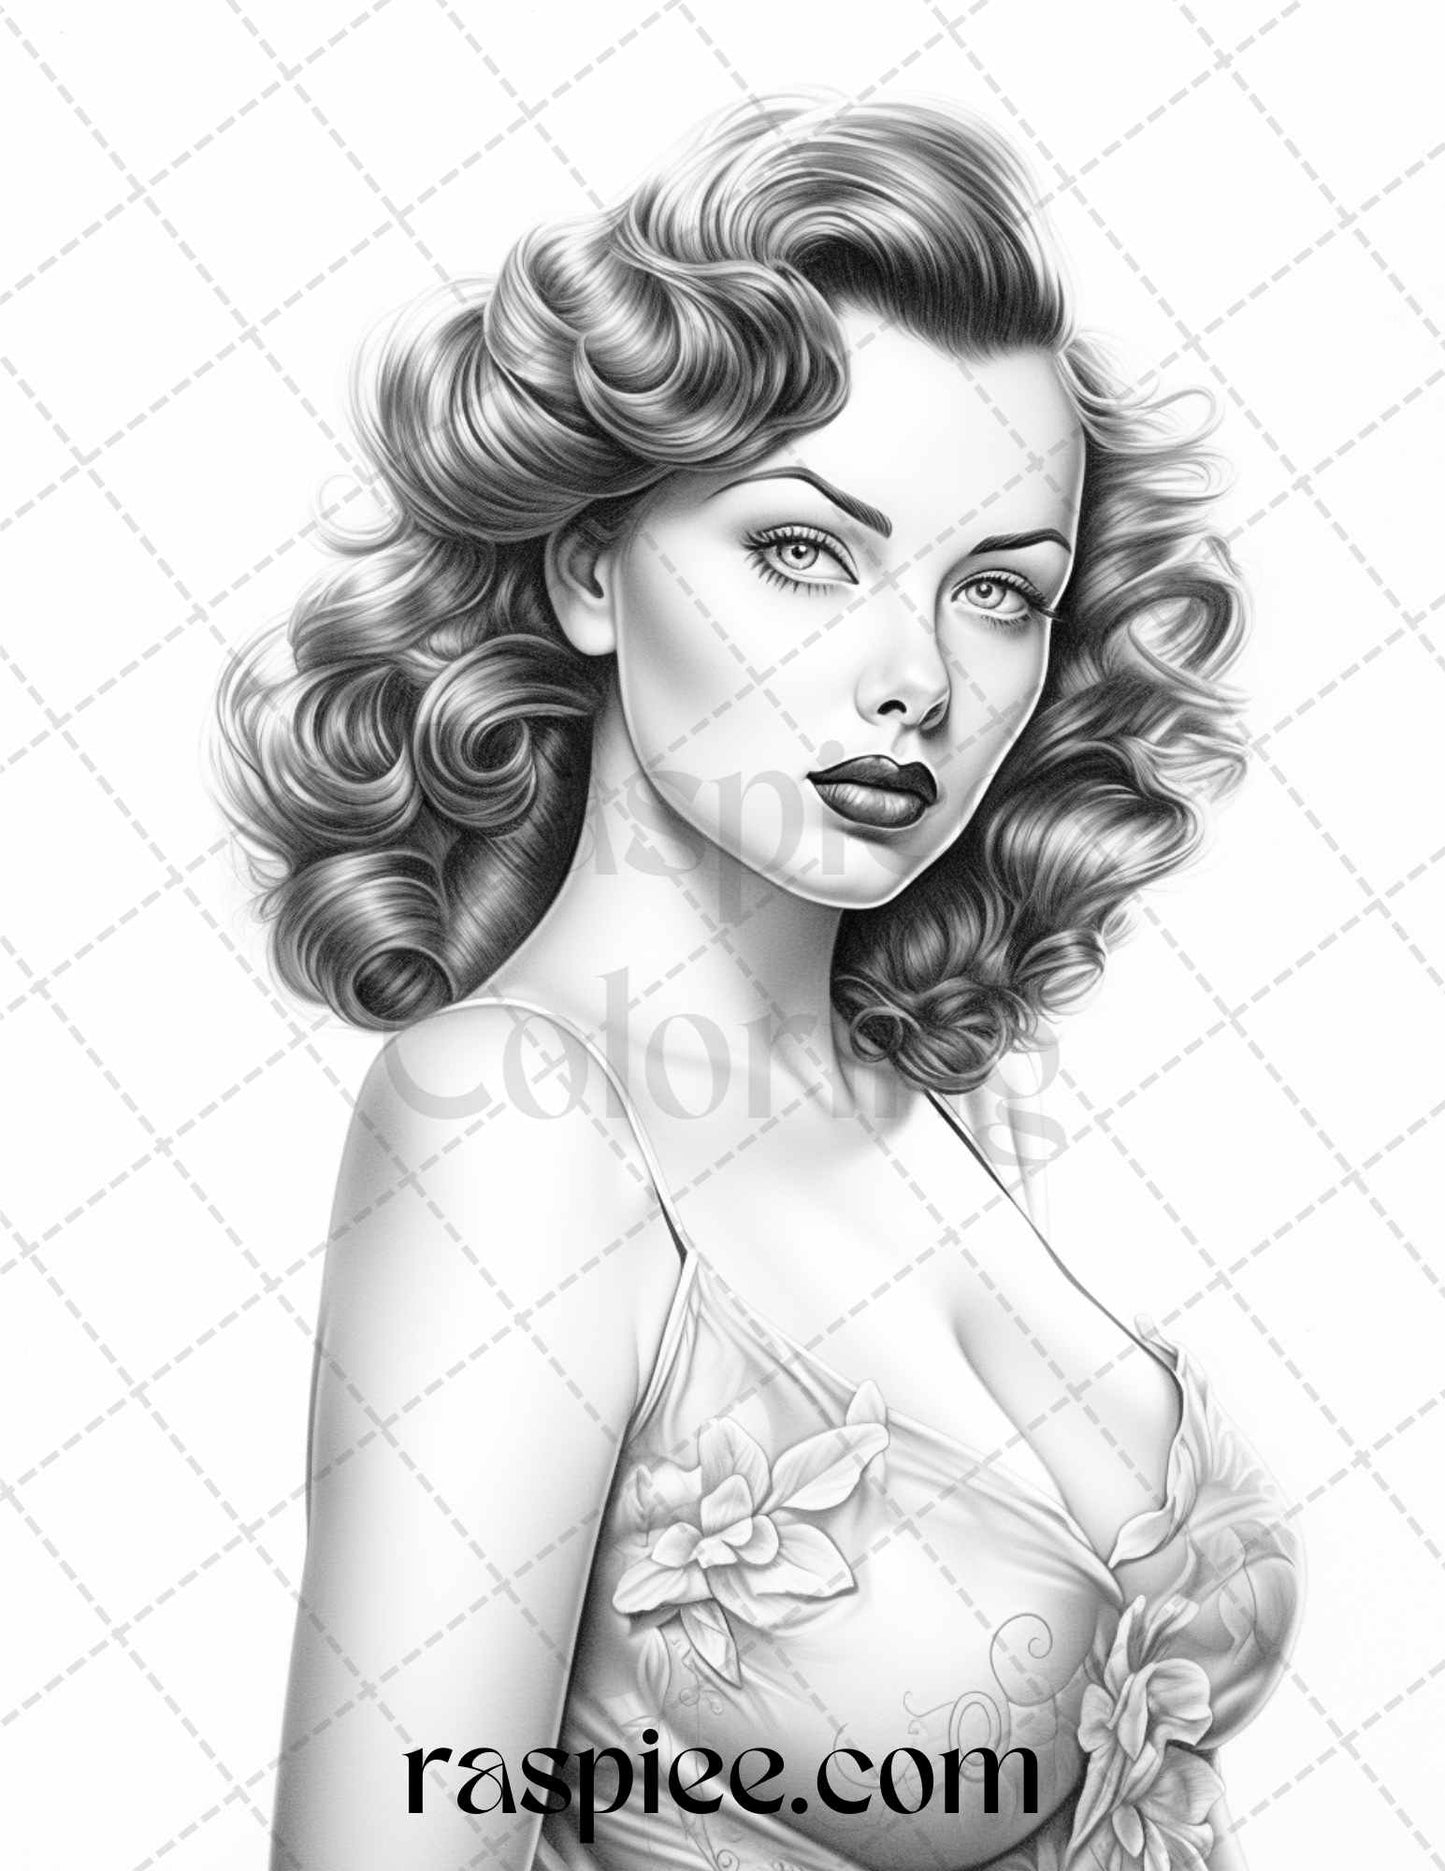 Vintage Pin Up Girls Coloring Pages, Grayscale Printable Art for Adults, Retro Illustrations Coloring Sheets, Vintage Pin-Up Girls Artwork, Printable Adult Coloring Pages, Grayscale Pinup Coloring Book